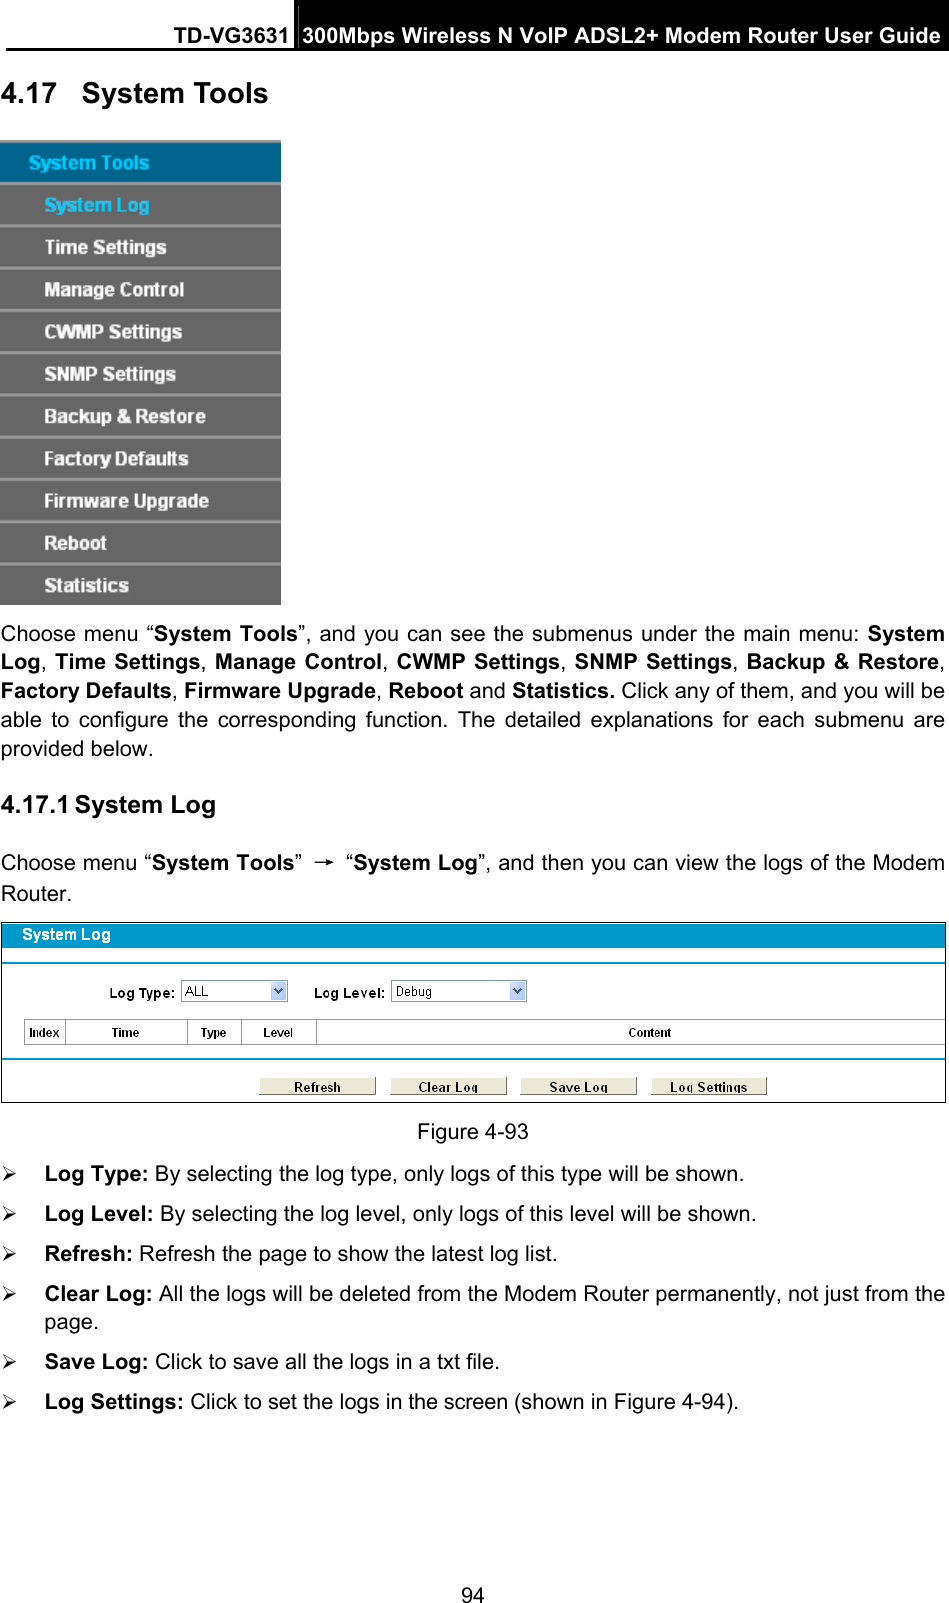 TD-VG3631 300Mbps Wireless N VoIP ADSL2+ Modem Router User Guide 94 4.17  System Tools  Choose menu “System Tools”, and you can see the submenus under the main menu: System Log, Time Settings, Manage Control, CWMP Settings, SNMP Settings, Backup &amp; Restore, Factory Defaults, Firmware Upgrade, Reboot and Statistics. Click any of them, and you will be able to configure the corresponding function. The detailed explanations for each submenu are provided below. 4.17.1 System Log Choose menu “System Tools” → “System Log”, and then you can view the logs of the Modem Router.  Figure 4-93    Log Type: By selecting the log type, only logs of this type will be shown.  Log Level: By selecting the log level, only logs of this level will be shown.  Refresh: Refresh the page to show the latest log list.  Clear Log: All the logs will be deleted from the Modem Router permanently, not just from the page.   Save Log: Click to save all the logs in a txt file.    Log Settings: Click to set the logs in the screen (shown in Figure 4-94). 